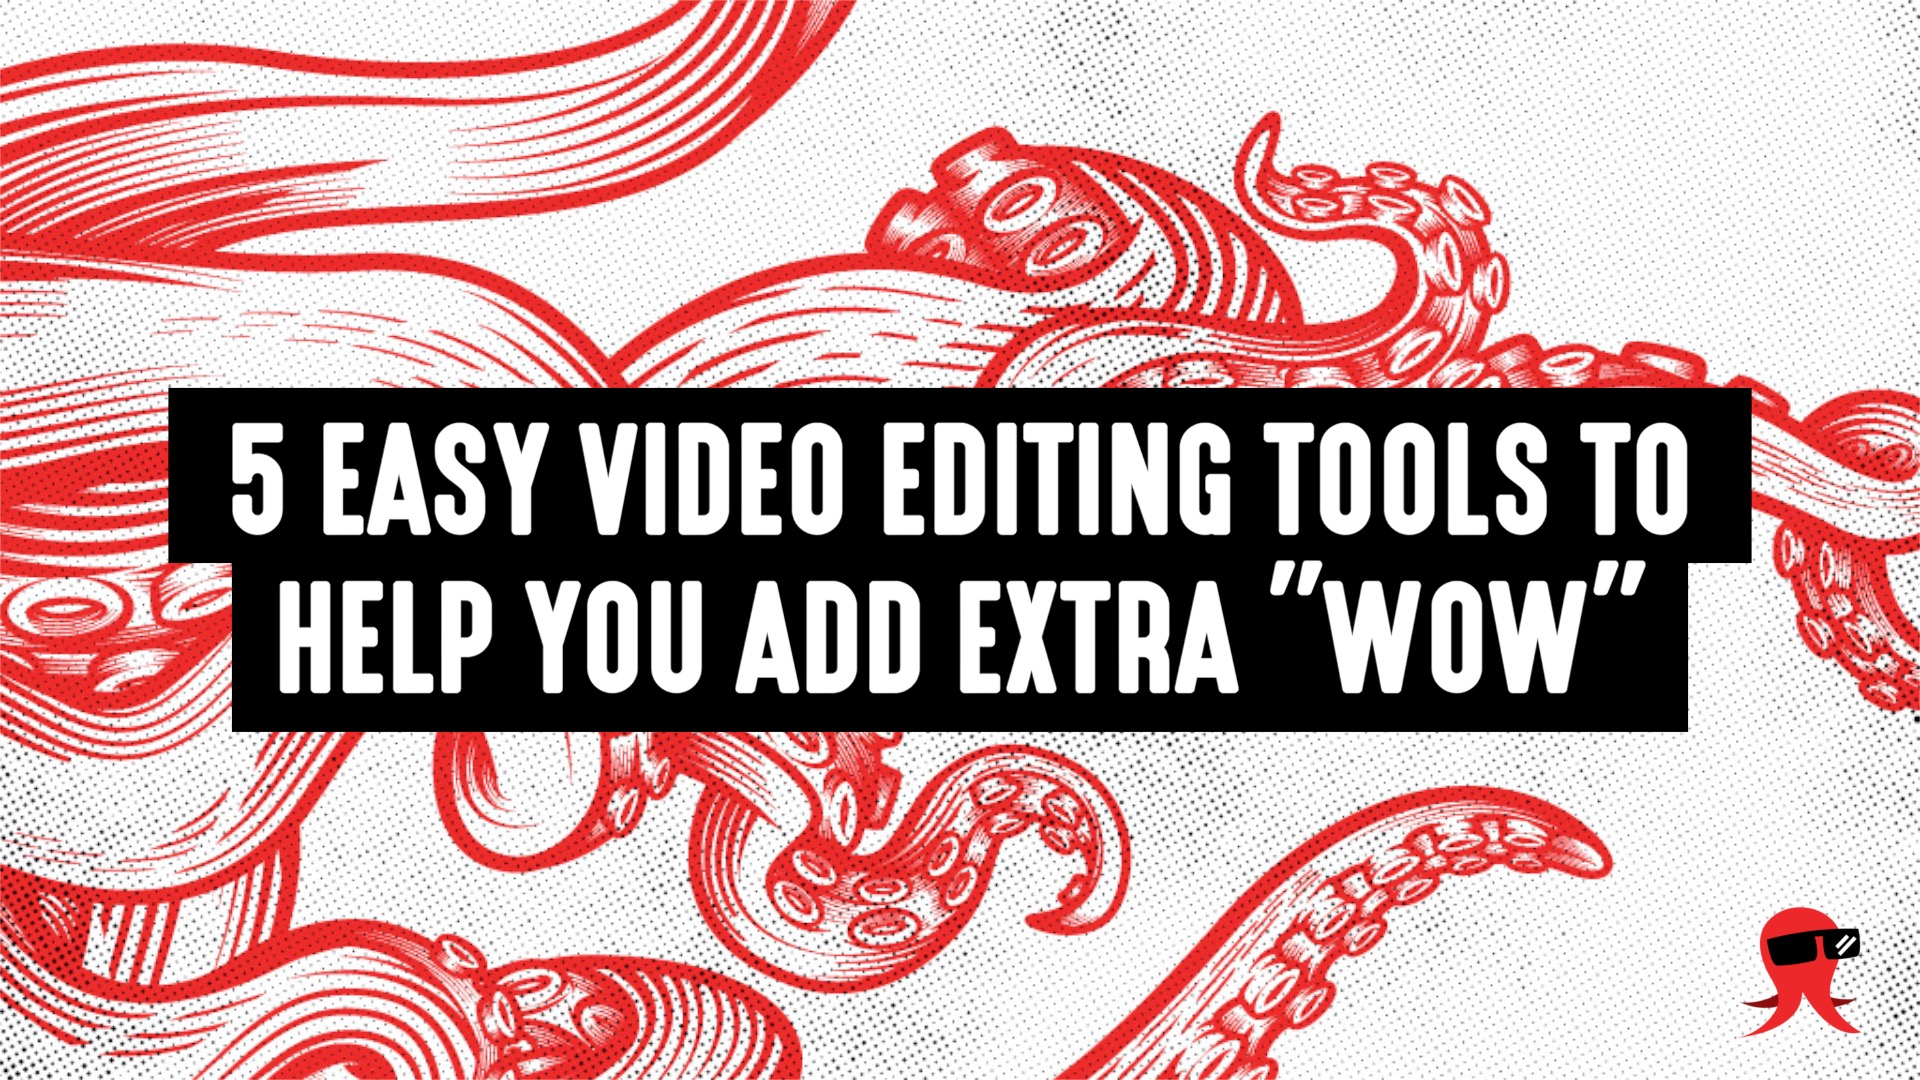 5 Easy Video Editing Tools to Help You Add Extra “Wow”